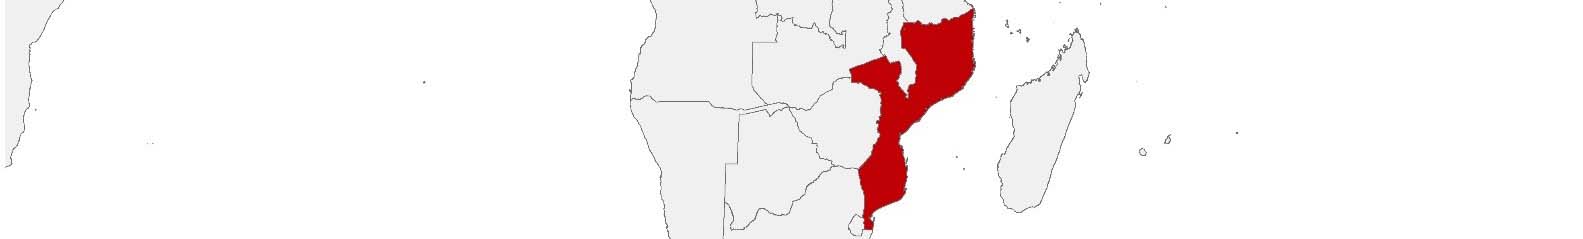 Purchasing power data and socio-demographic data can be displayed on a map of Mozambique using the following area boundaries: Províncias.